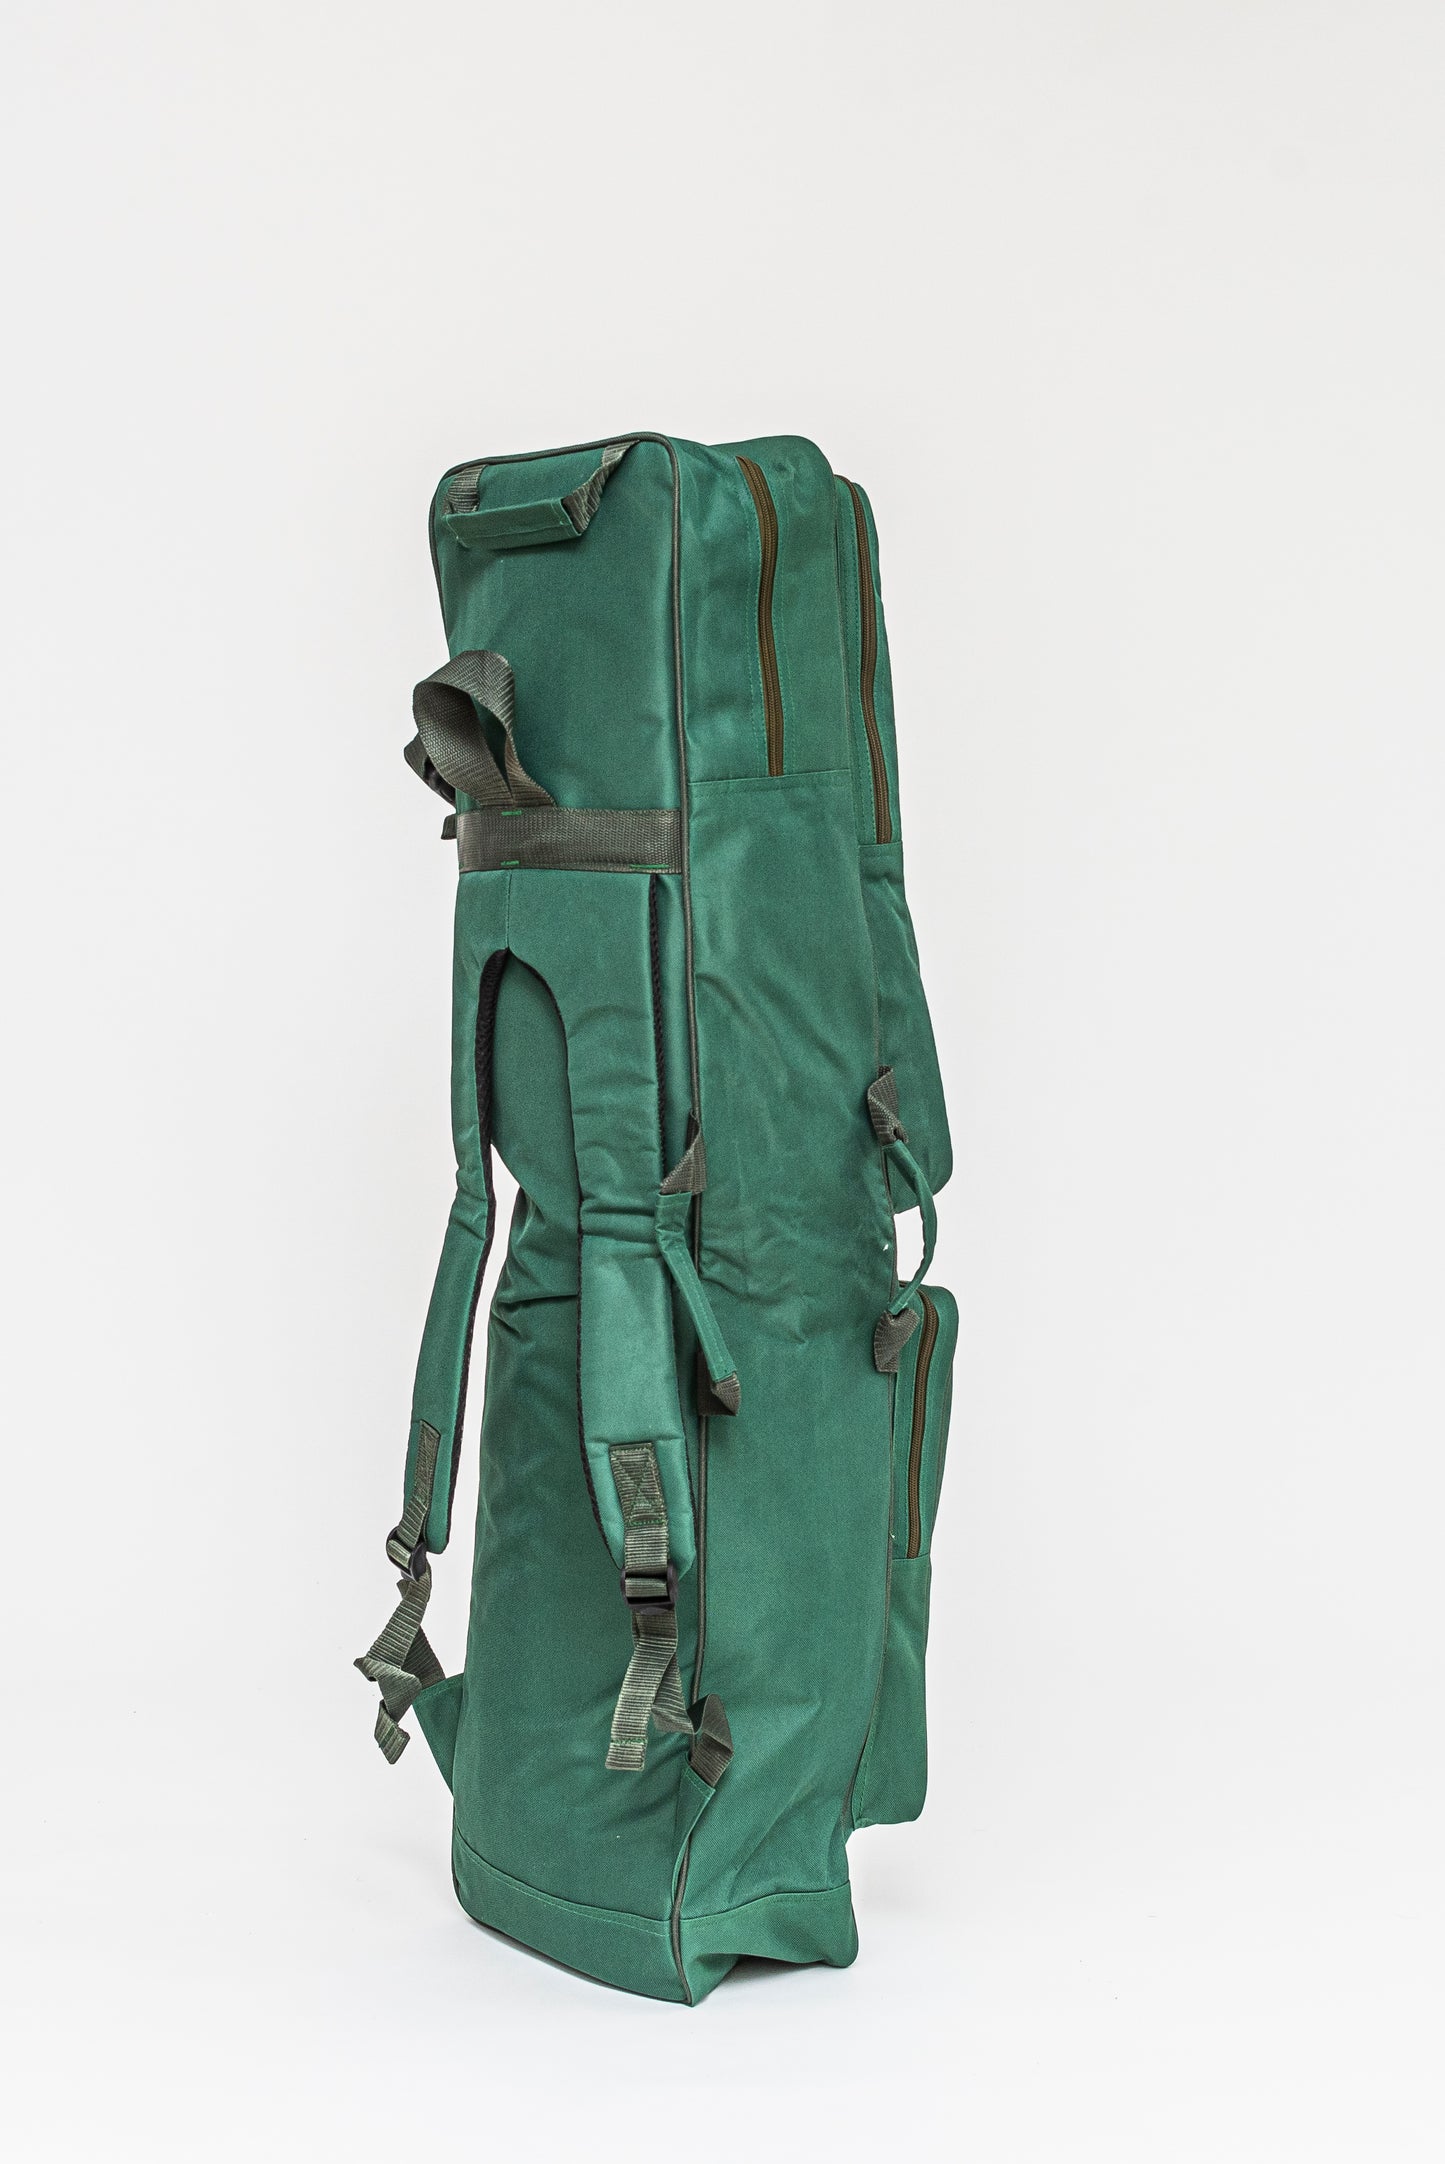 AUTHENTIC PROBAG GREEN